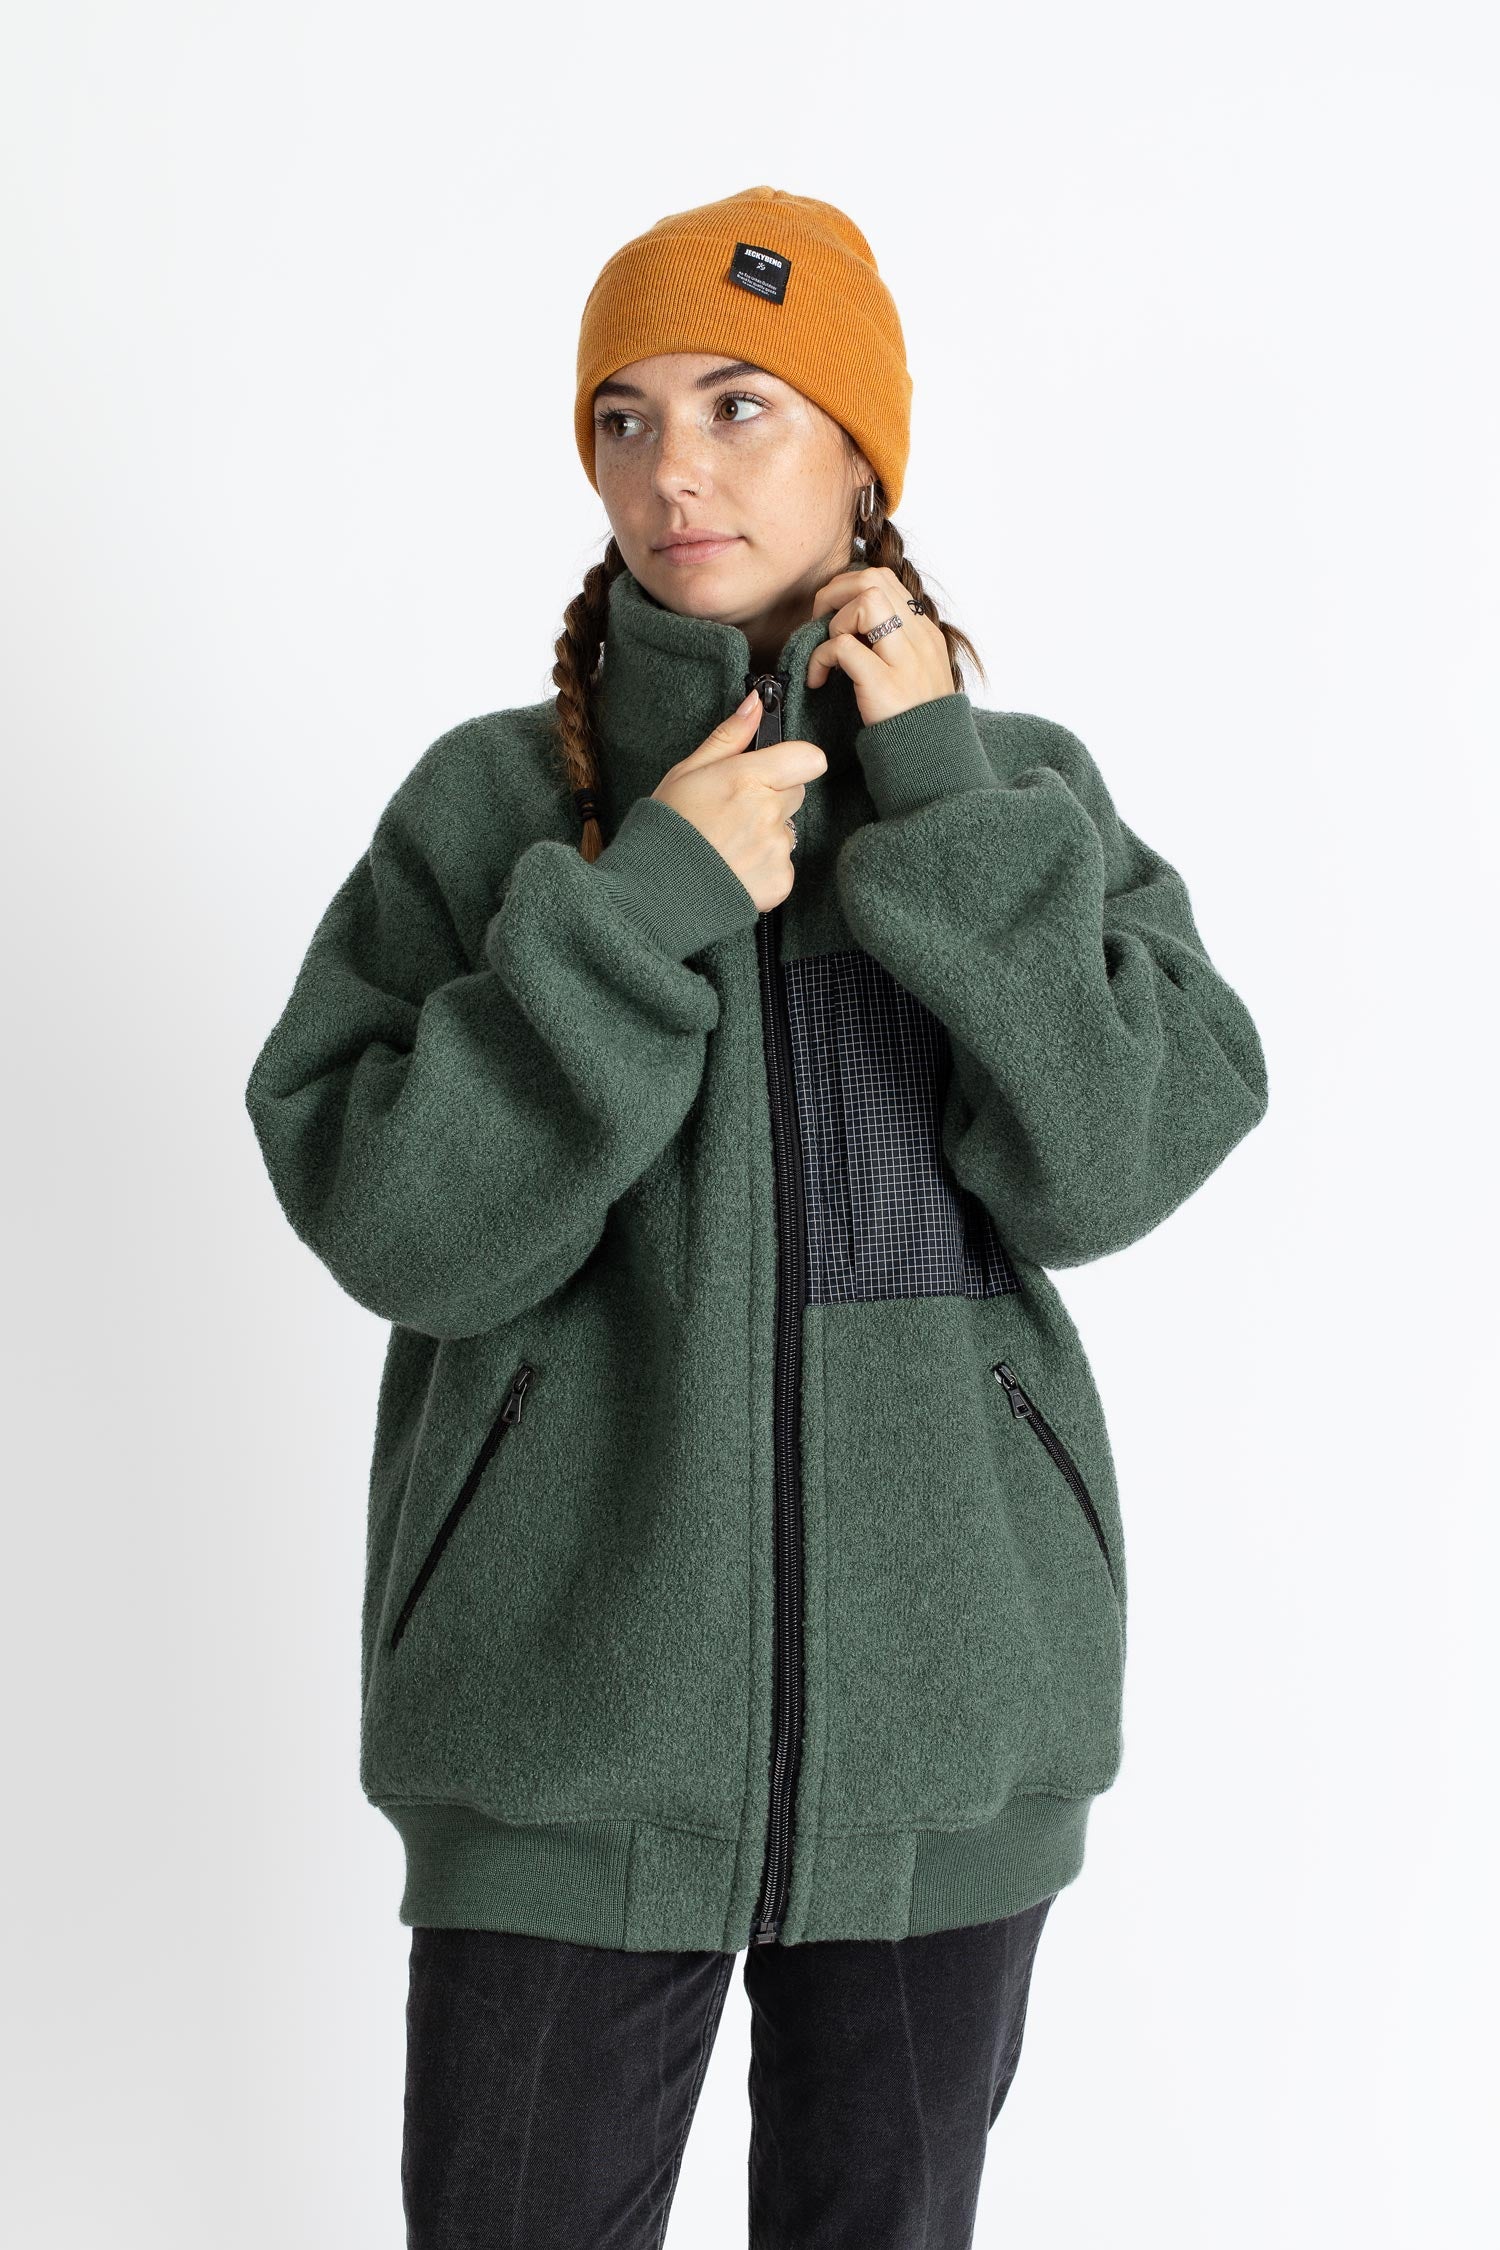 JECKYBENG-The-NATURAL-WOOLFLEECE-JACKET-01 olive-green